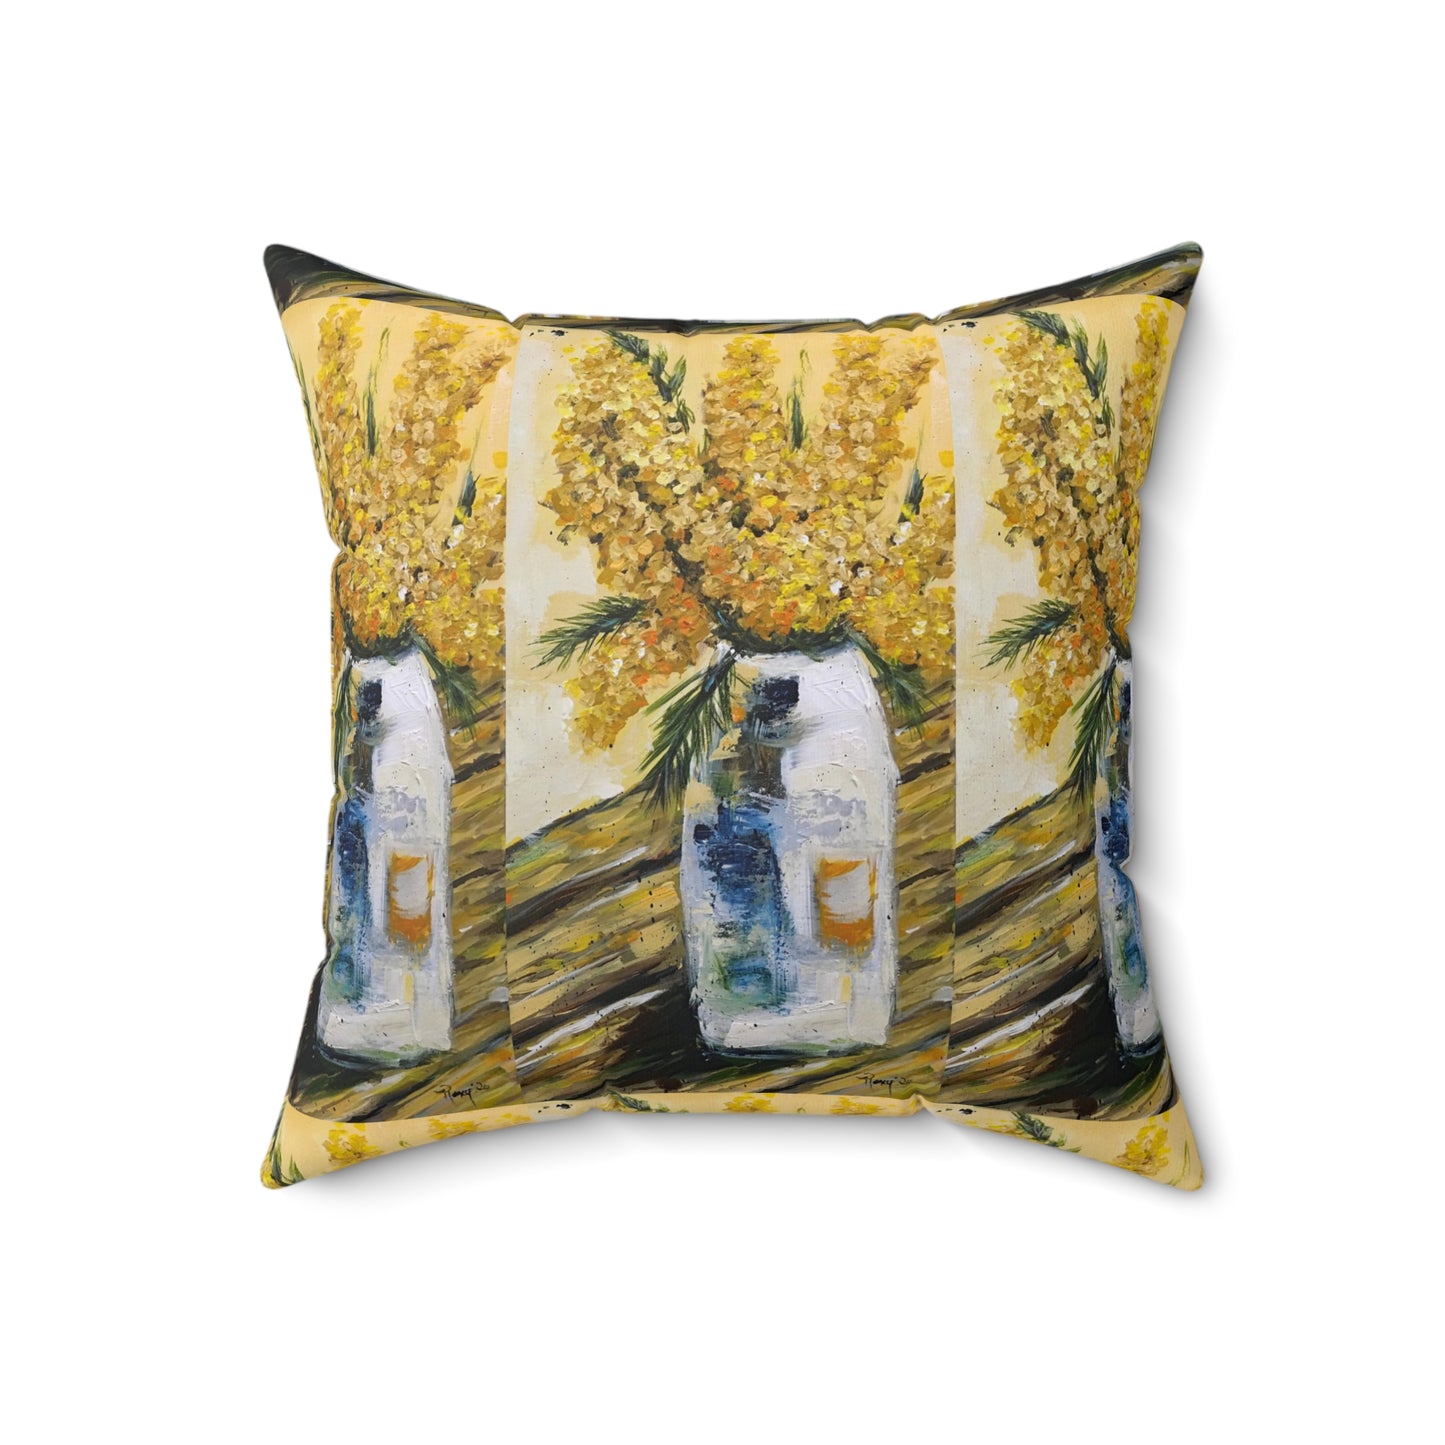 Goldenrod on the Picnic Table Indoor Spun Polyester Square Pillow